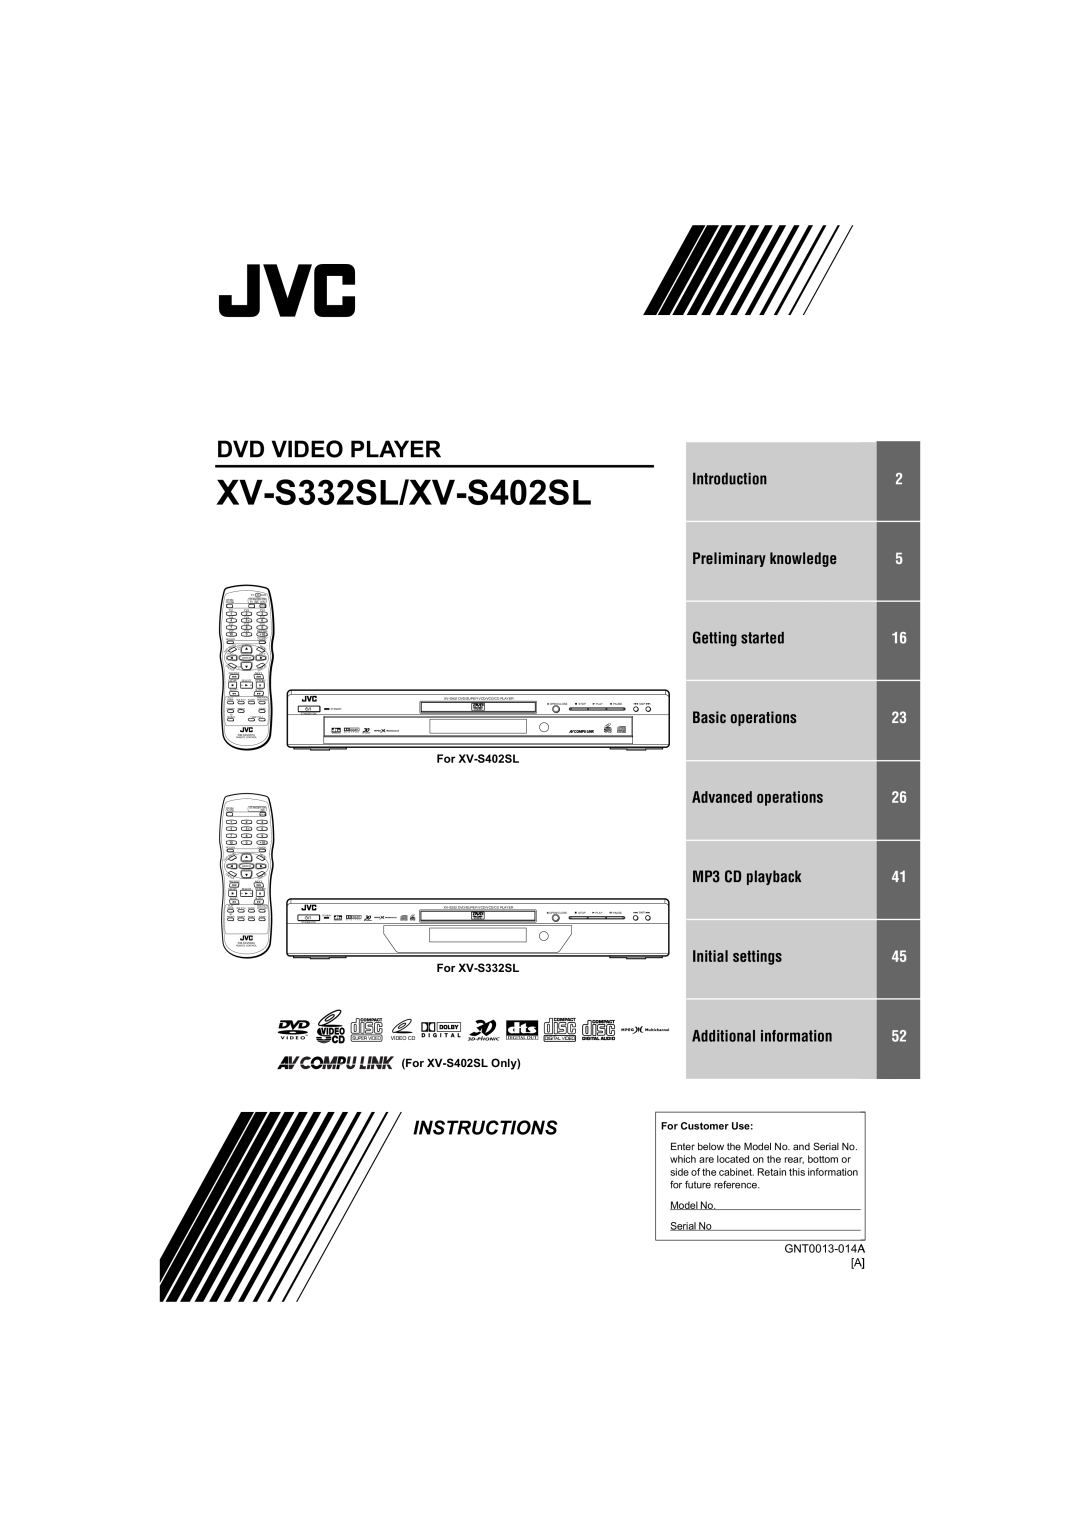 JVC GNT0013-014A manual 966/966, 16758&7,216, 99,23/$5, Introduction, Preliminary knowledge, Getting started, 17$ $@ 